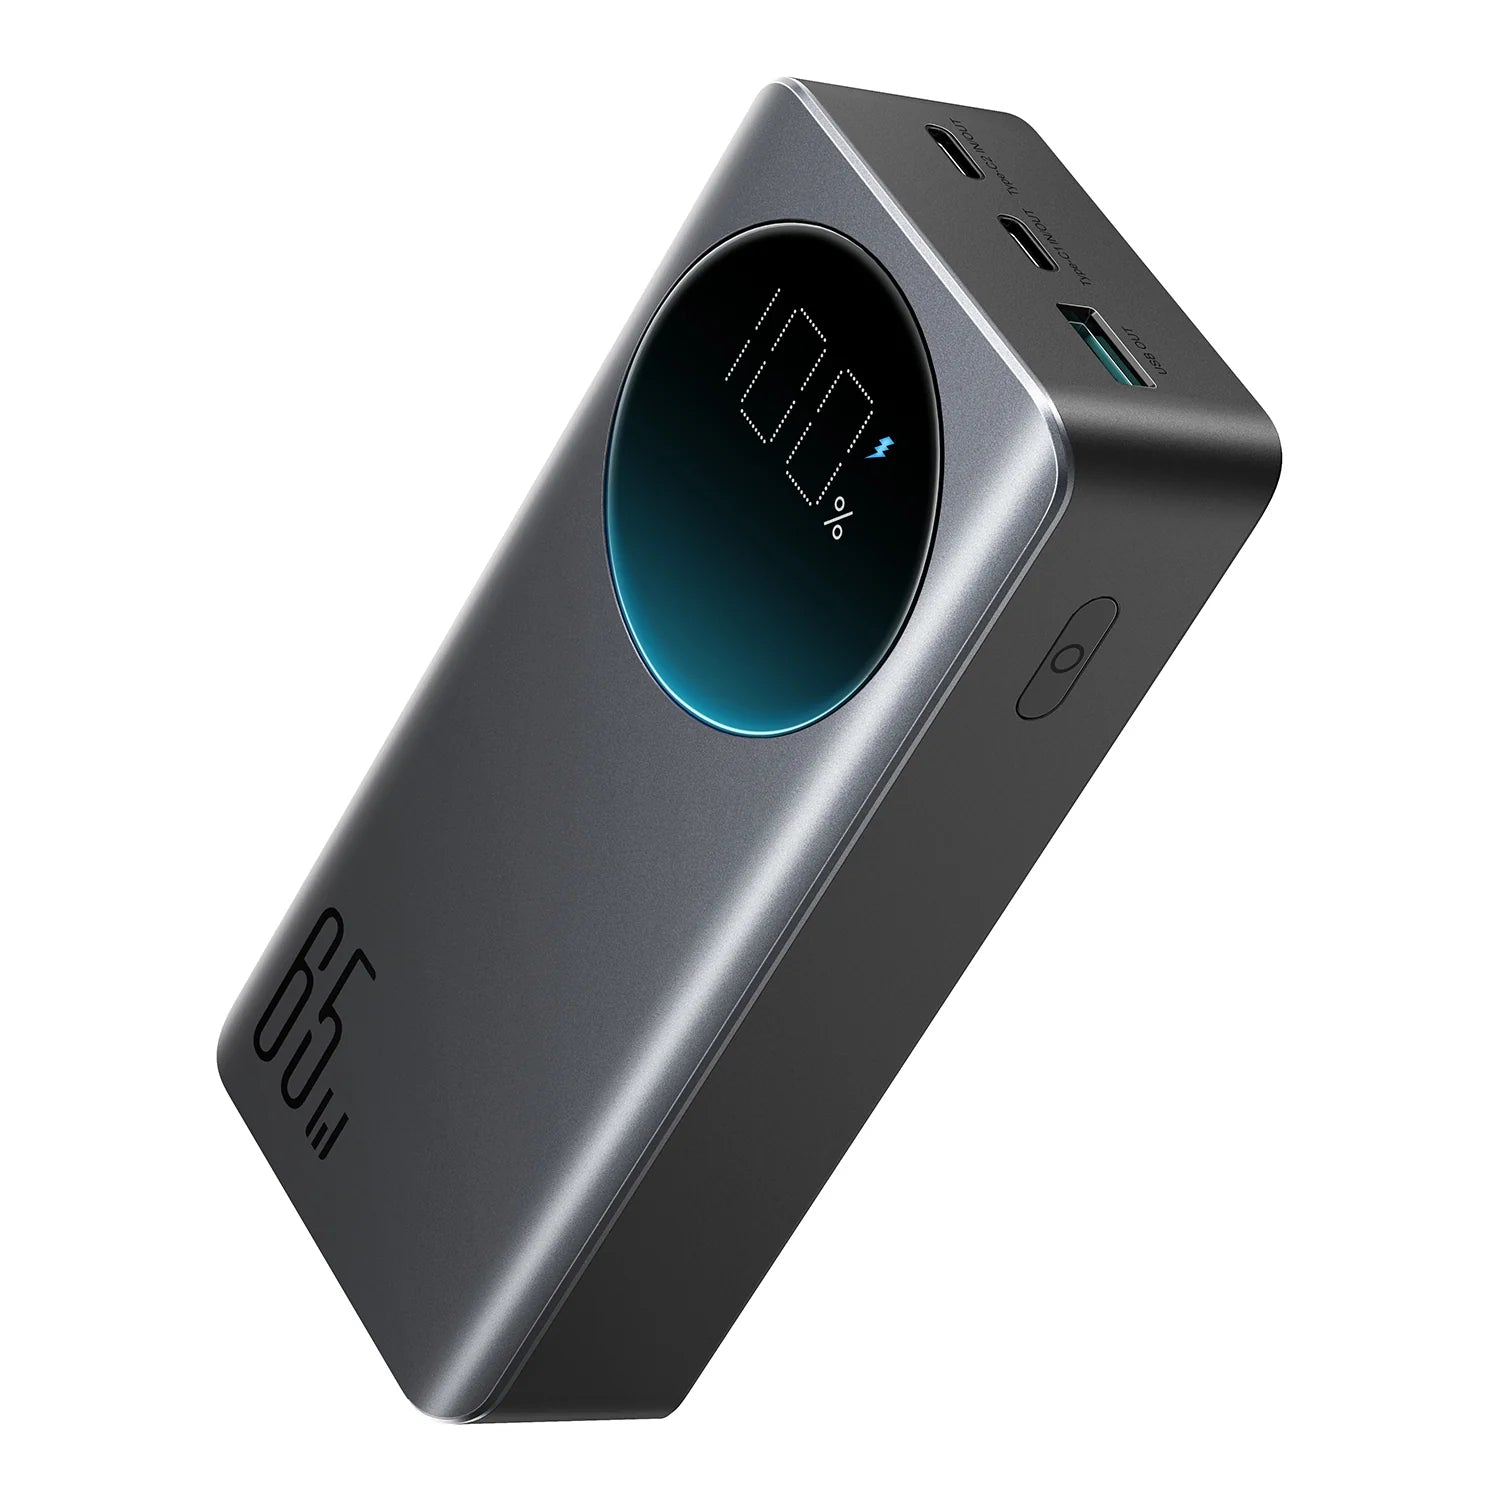 Baseus 65W and 100W power banks: Powerful and very convenient